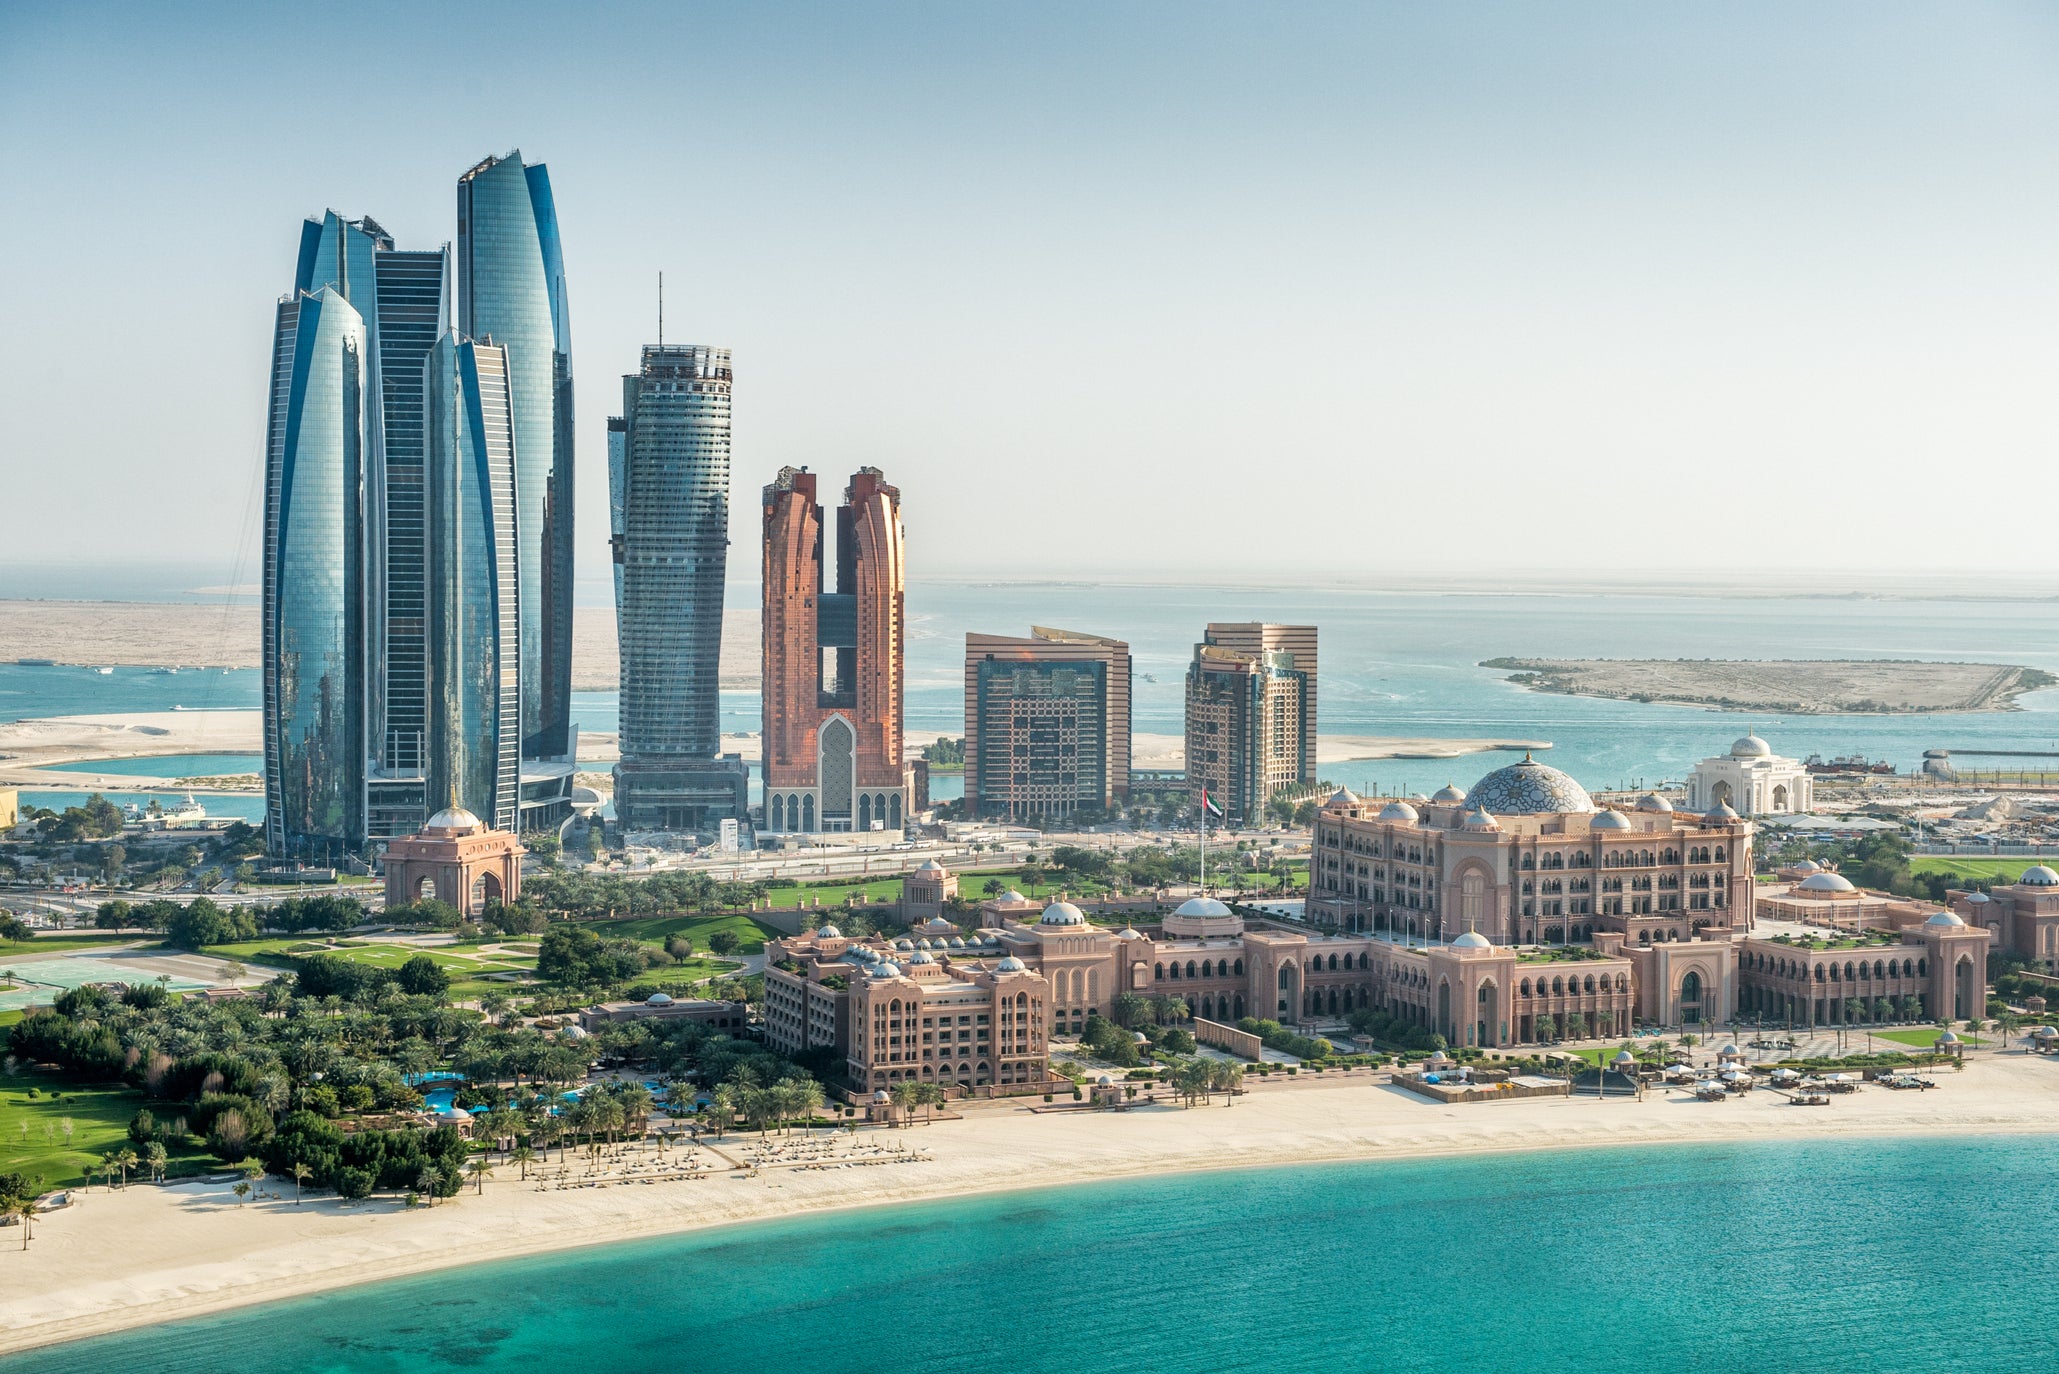 Abu Dhabi guide: Where to sightsee, stay and eat in the UAE